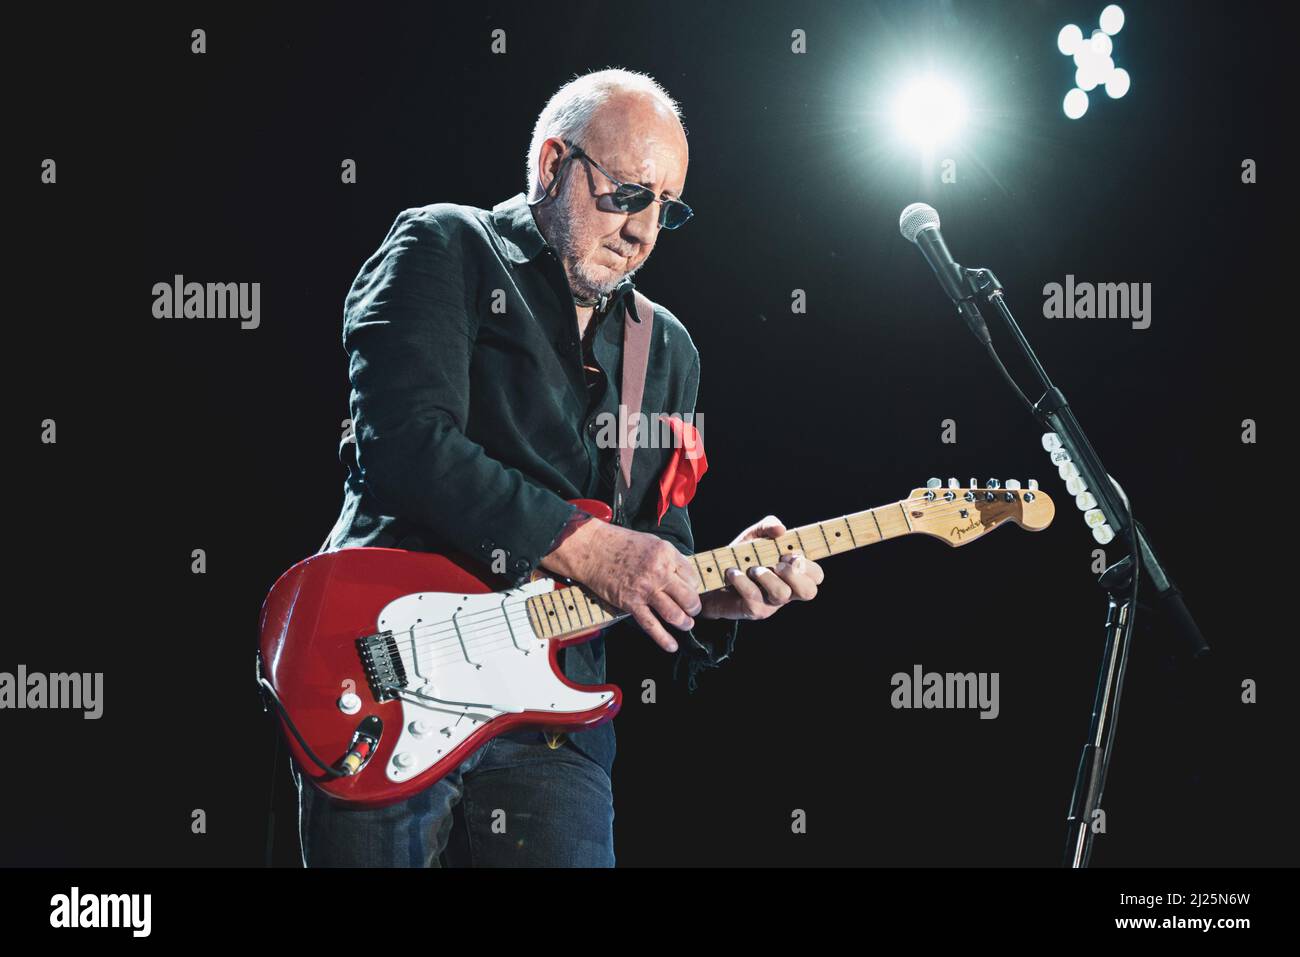 ITALY, BOLOGNA, UNIPOL ARENA 2016: Pete Townshend, guitarist of the British rock band “The Who”, performing live on stage for the “Back to the Who” European tour Stock Photo